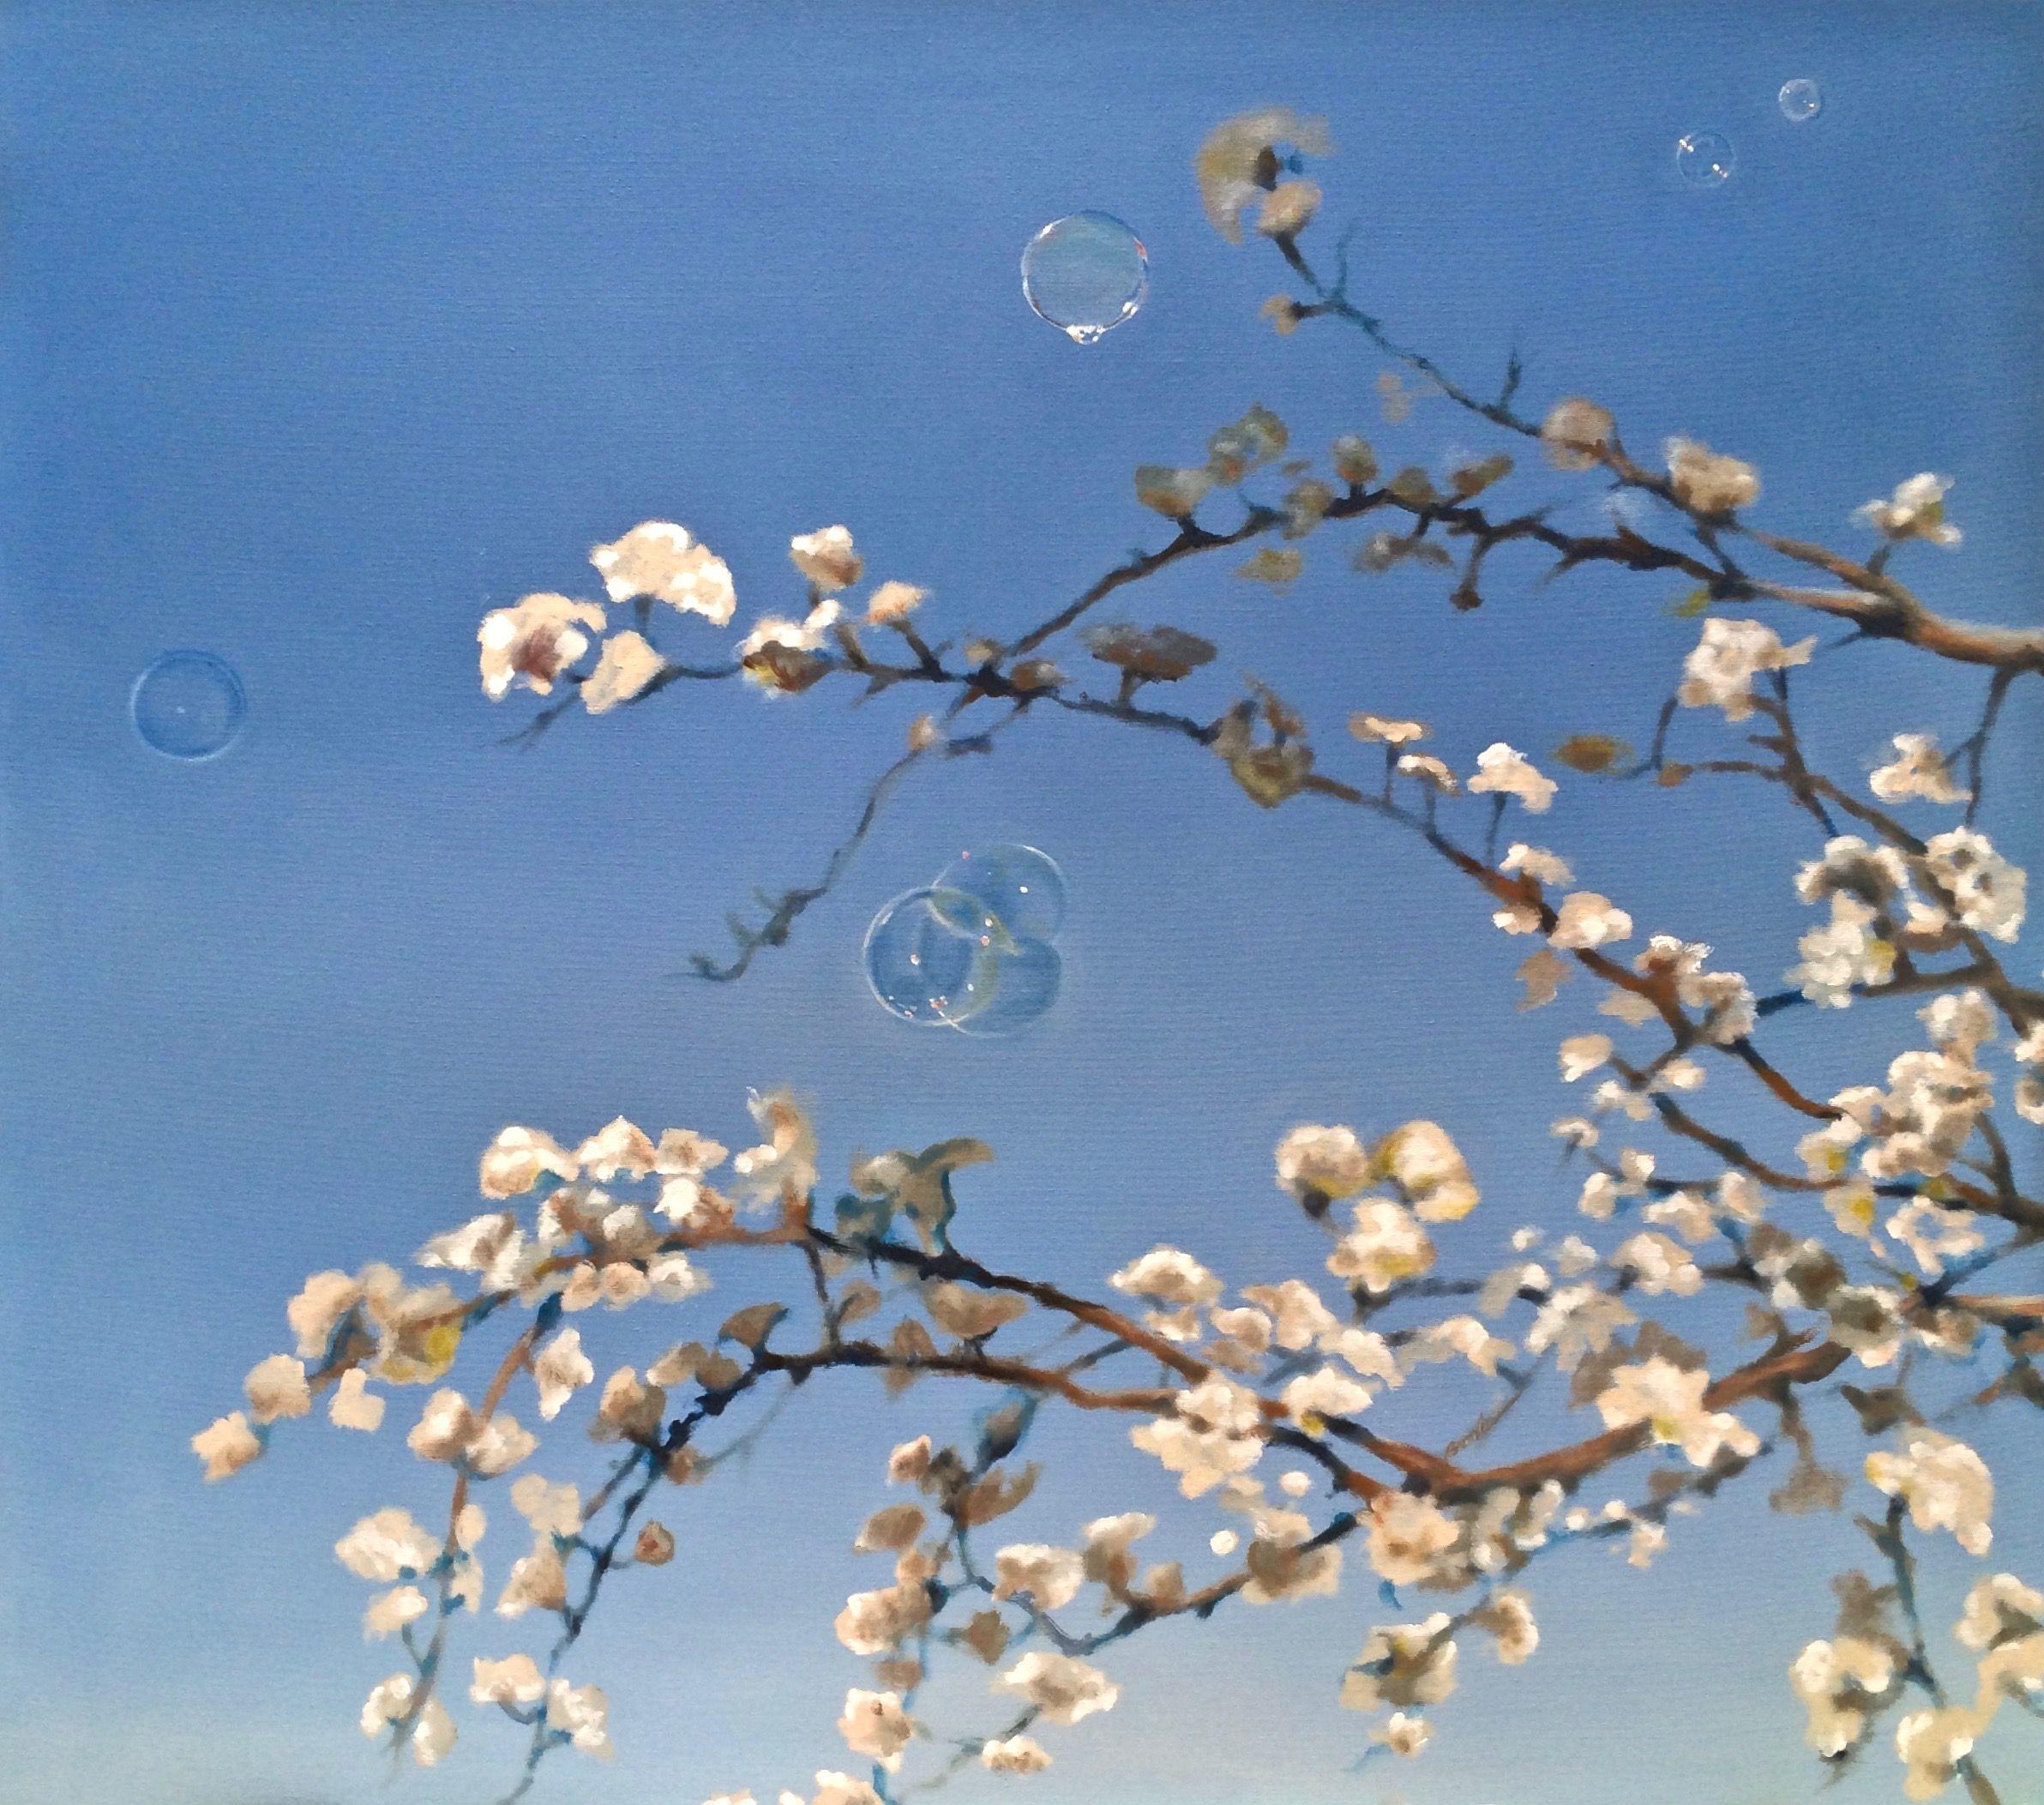 Soap bubbles floating through flowering pear tree branch against a blue sky. :: Painting :: Realism :: This piece comes with an official certificate of authenticity signed by the artist :: Ready to Hang: Yes :: Signed: Yes :: Signature Location: